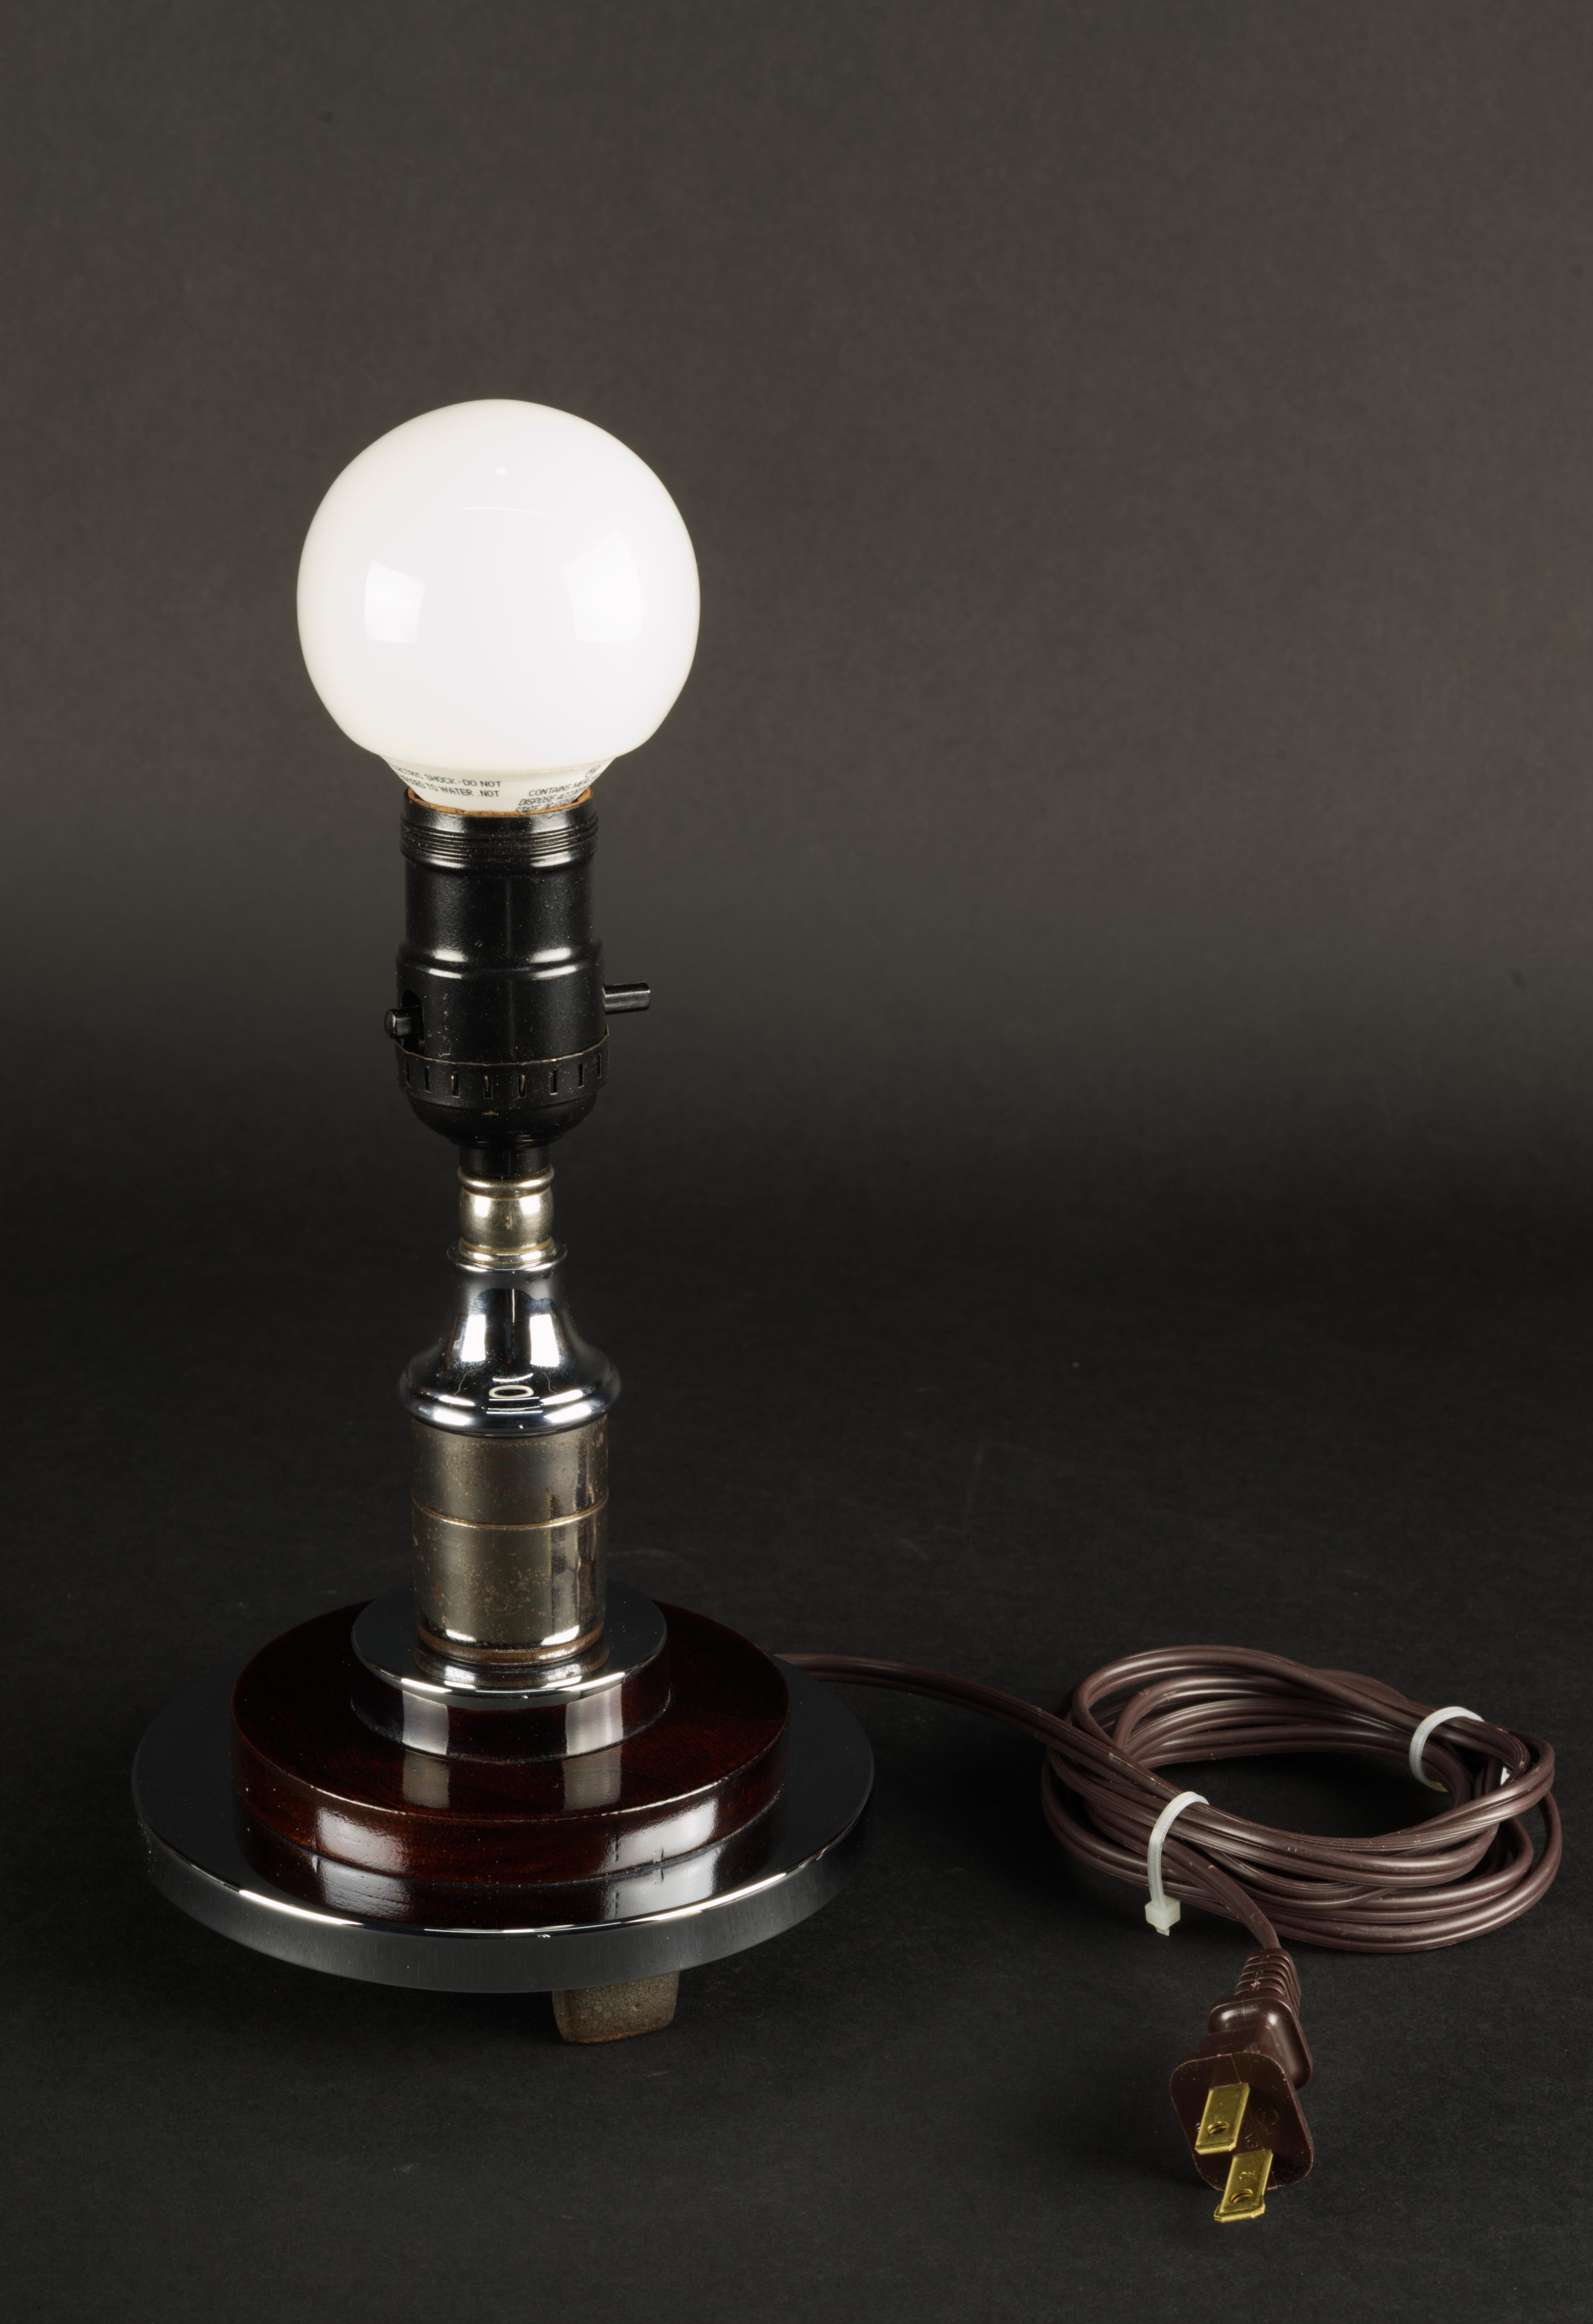 Small cute deco style table lamp in chrome. Wood spacer is lacquered and polished walnut. Therese some  deterioration to chrome. It's consistent with the age. Walnut lacquer looks good. Wire has been updated. E-26 socket with on/off push switch.